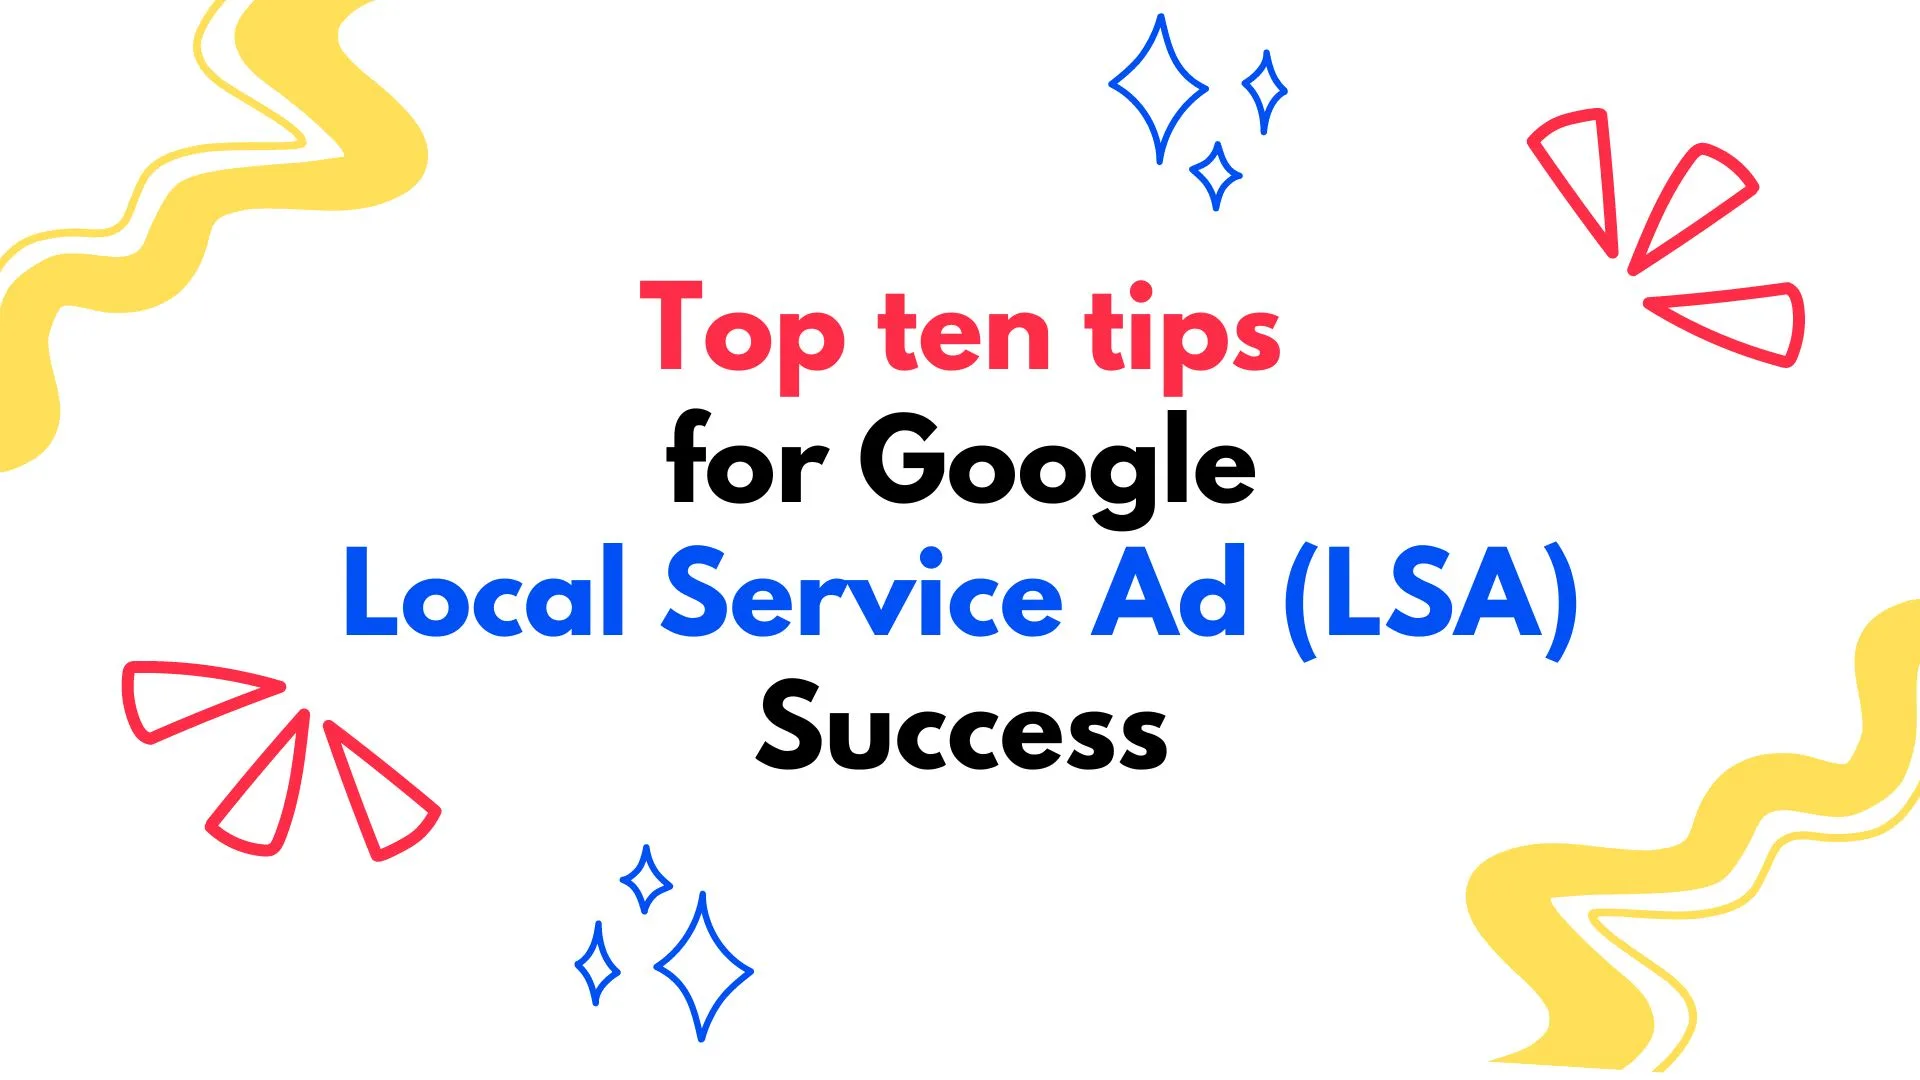 Graphic with the words 'Top Ten Tips for Google Local Service Ad (LSA) Success" surrounded by red, yellow and blue abstract shapes